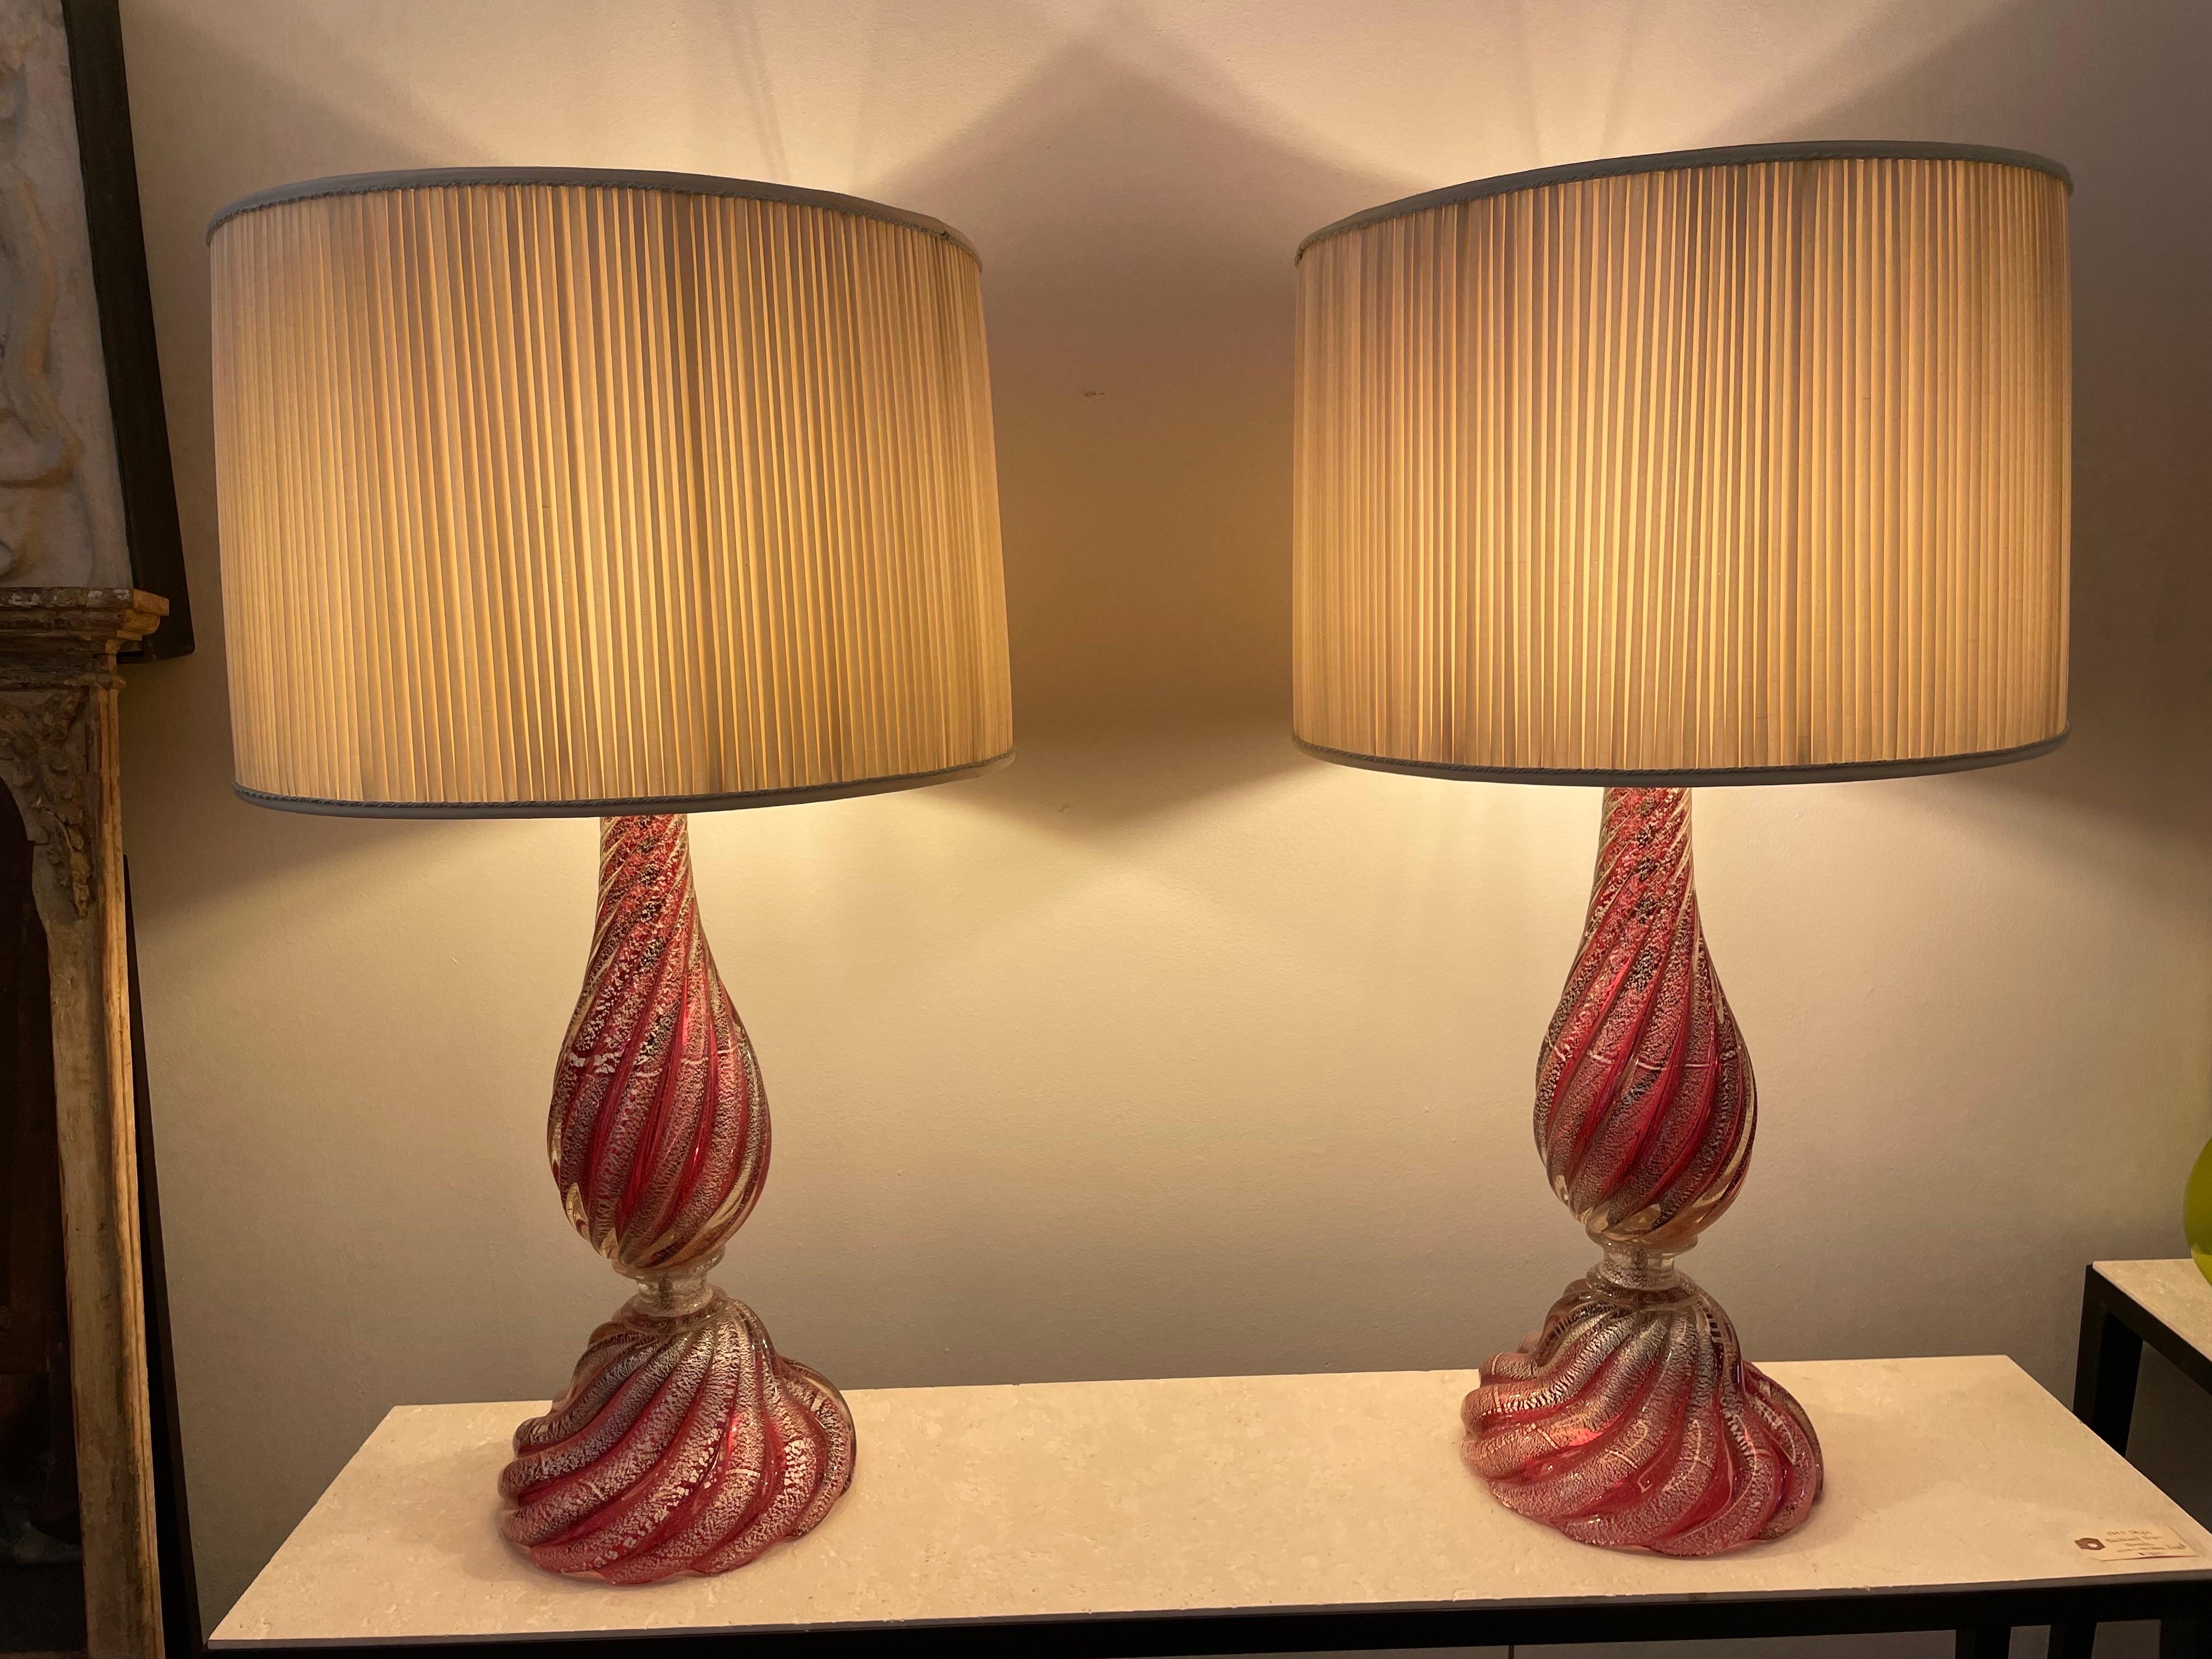 Oversized Raspberry Murano Glass Lamps W/ Silver Foil Inclusions by Barovier For Sale 8